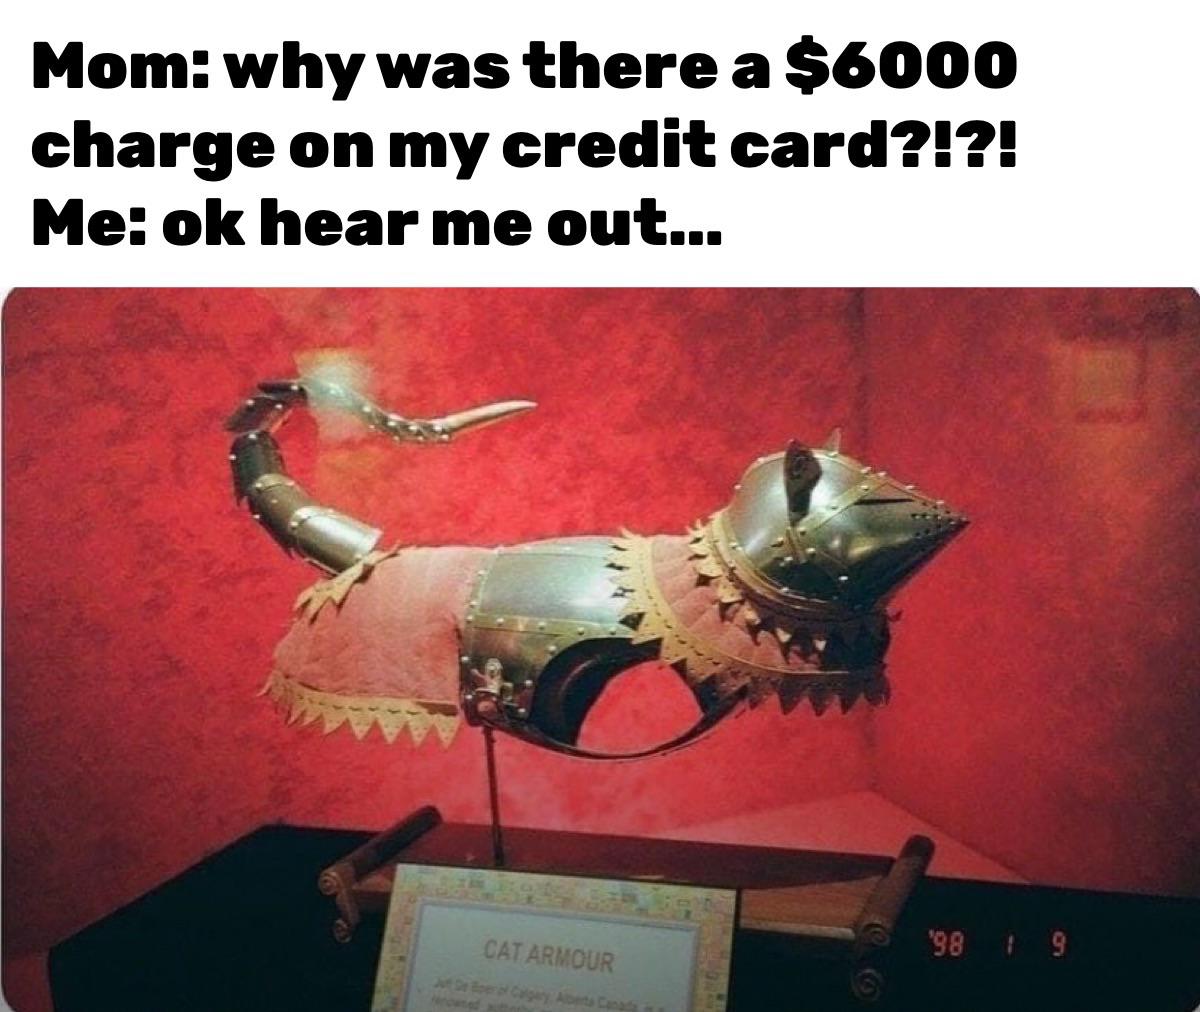 dank memes - armour cat - Mom why was there a $6000 charge on my credit card?!?! Me ok hear me out... '98 19 Cat Armour ut De Boer Calgary, Alberta Canada